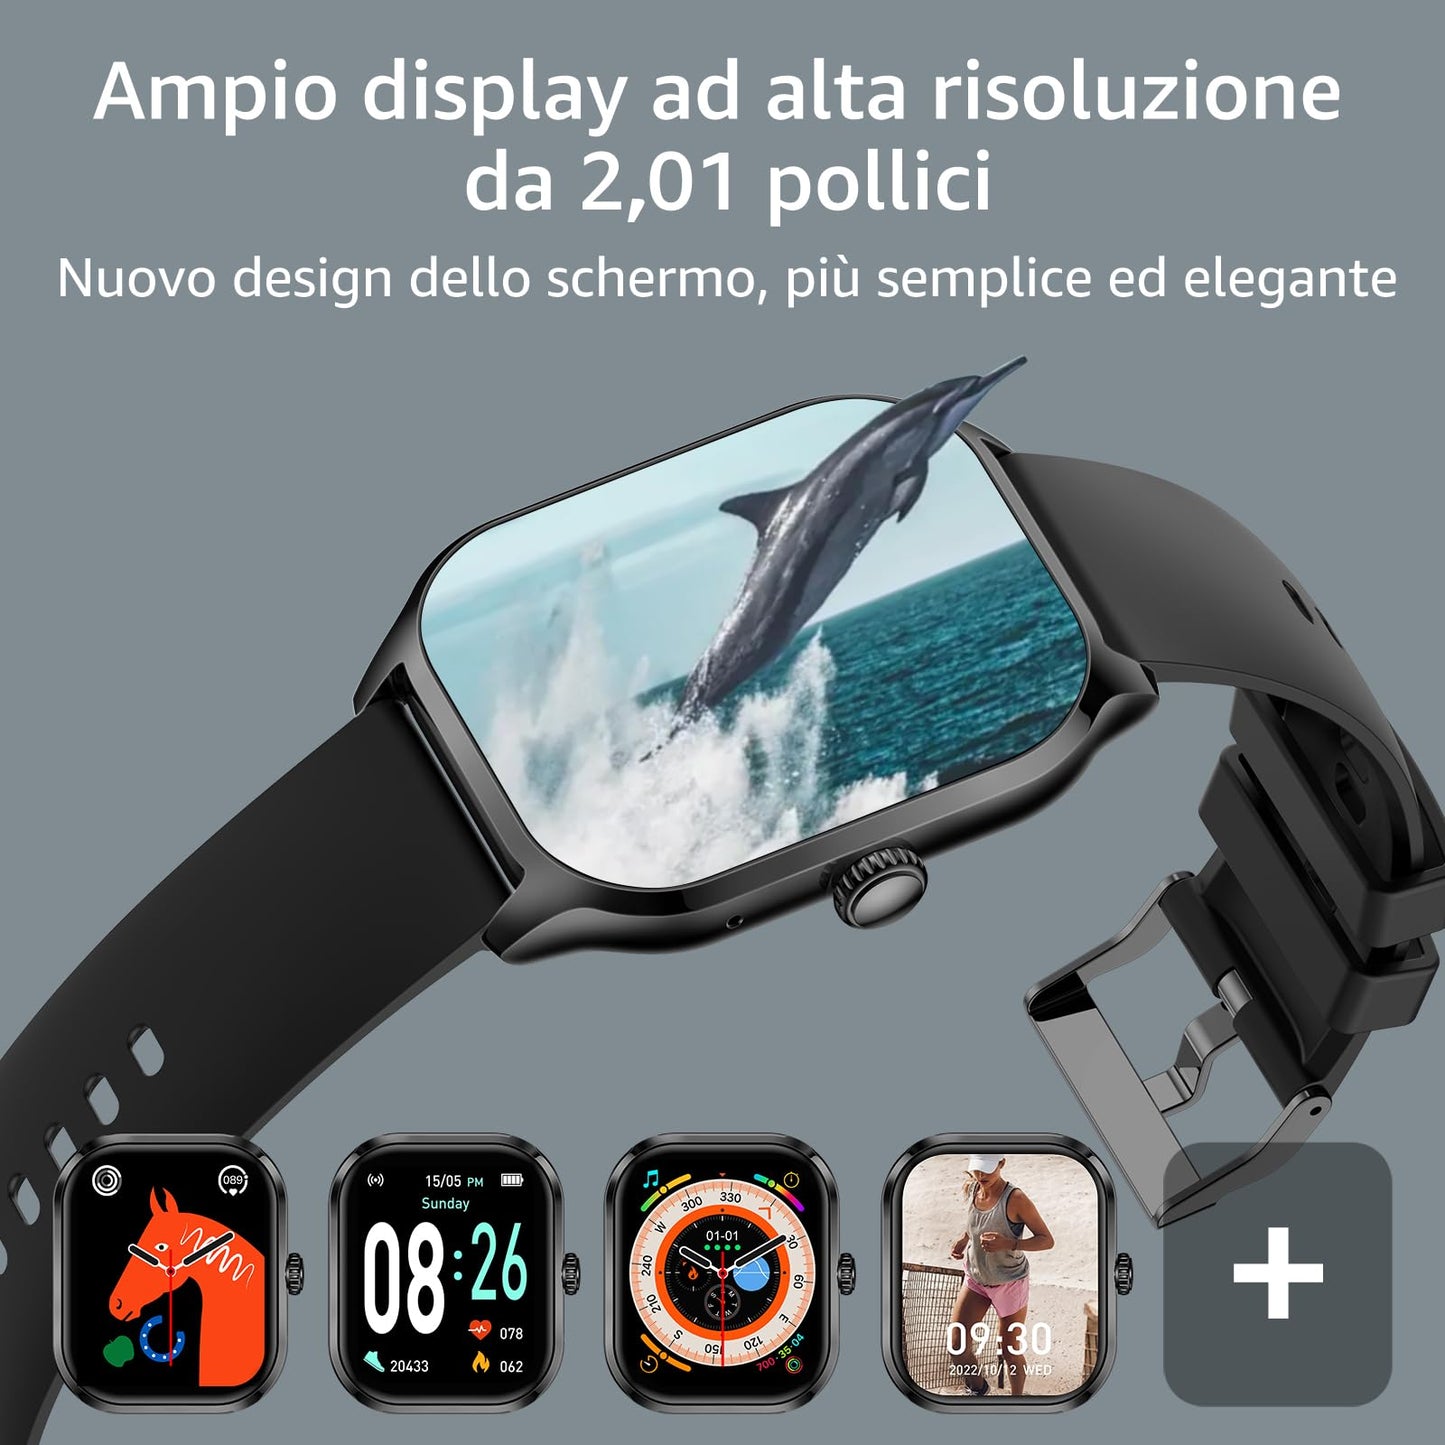 SMART WATCH ANDROID